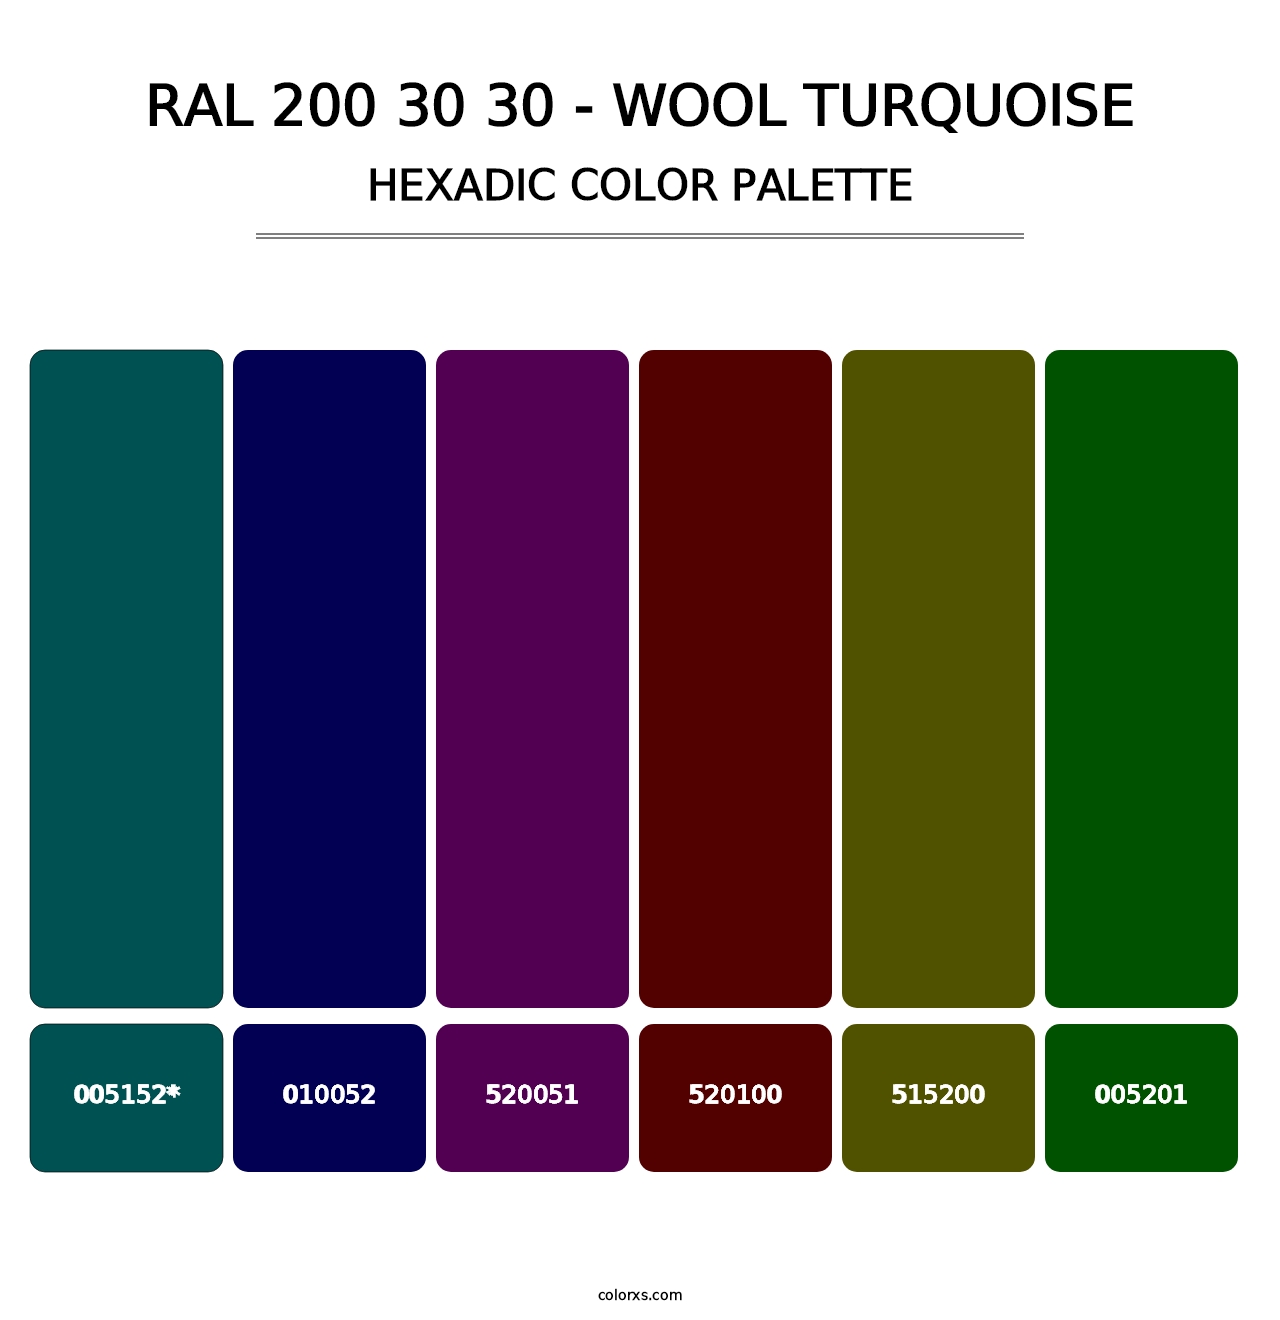 RAL 200 30 30 - Wool Turquoise - Hexadic Color Palette